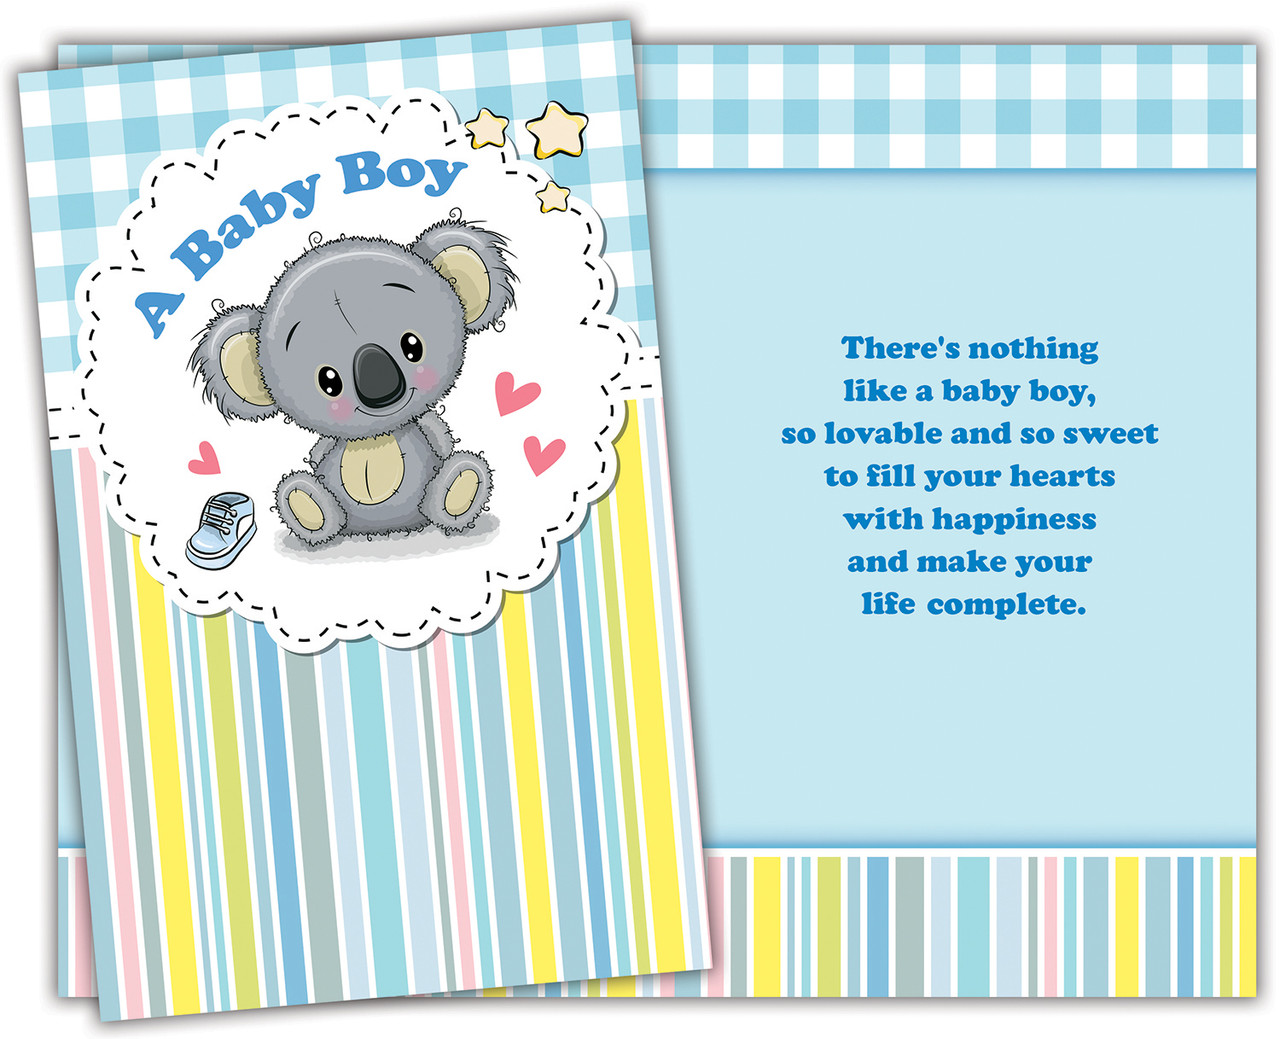 96276 six new baby boy greeting cards with six envelopes, $1.80 ...